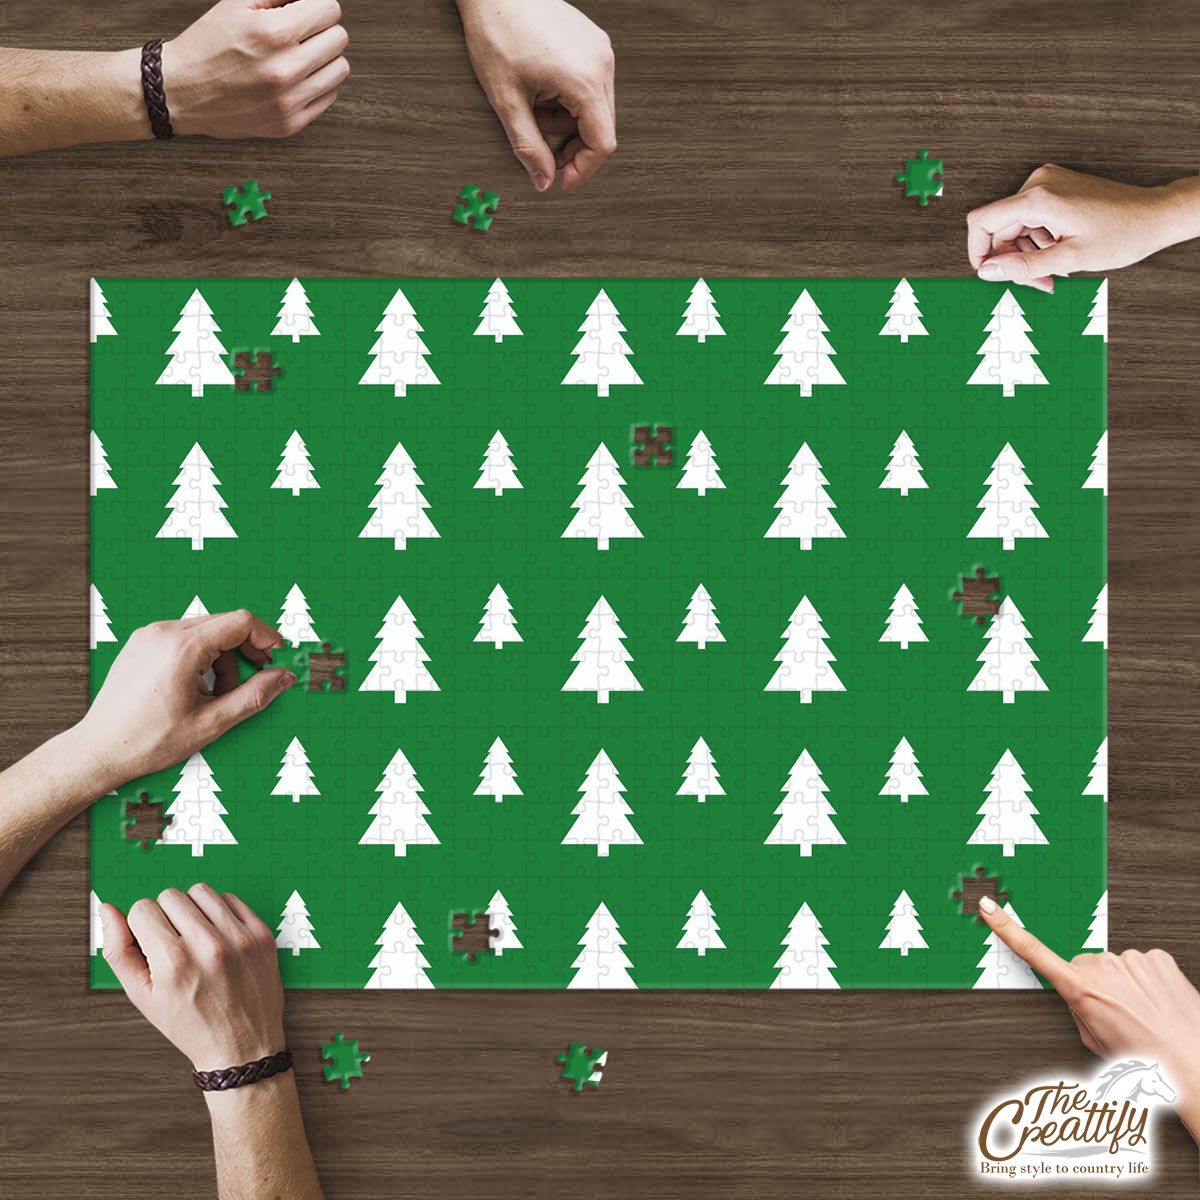 Green And White Christmas Tree Puzzle